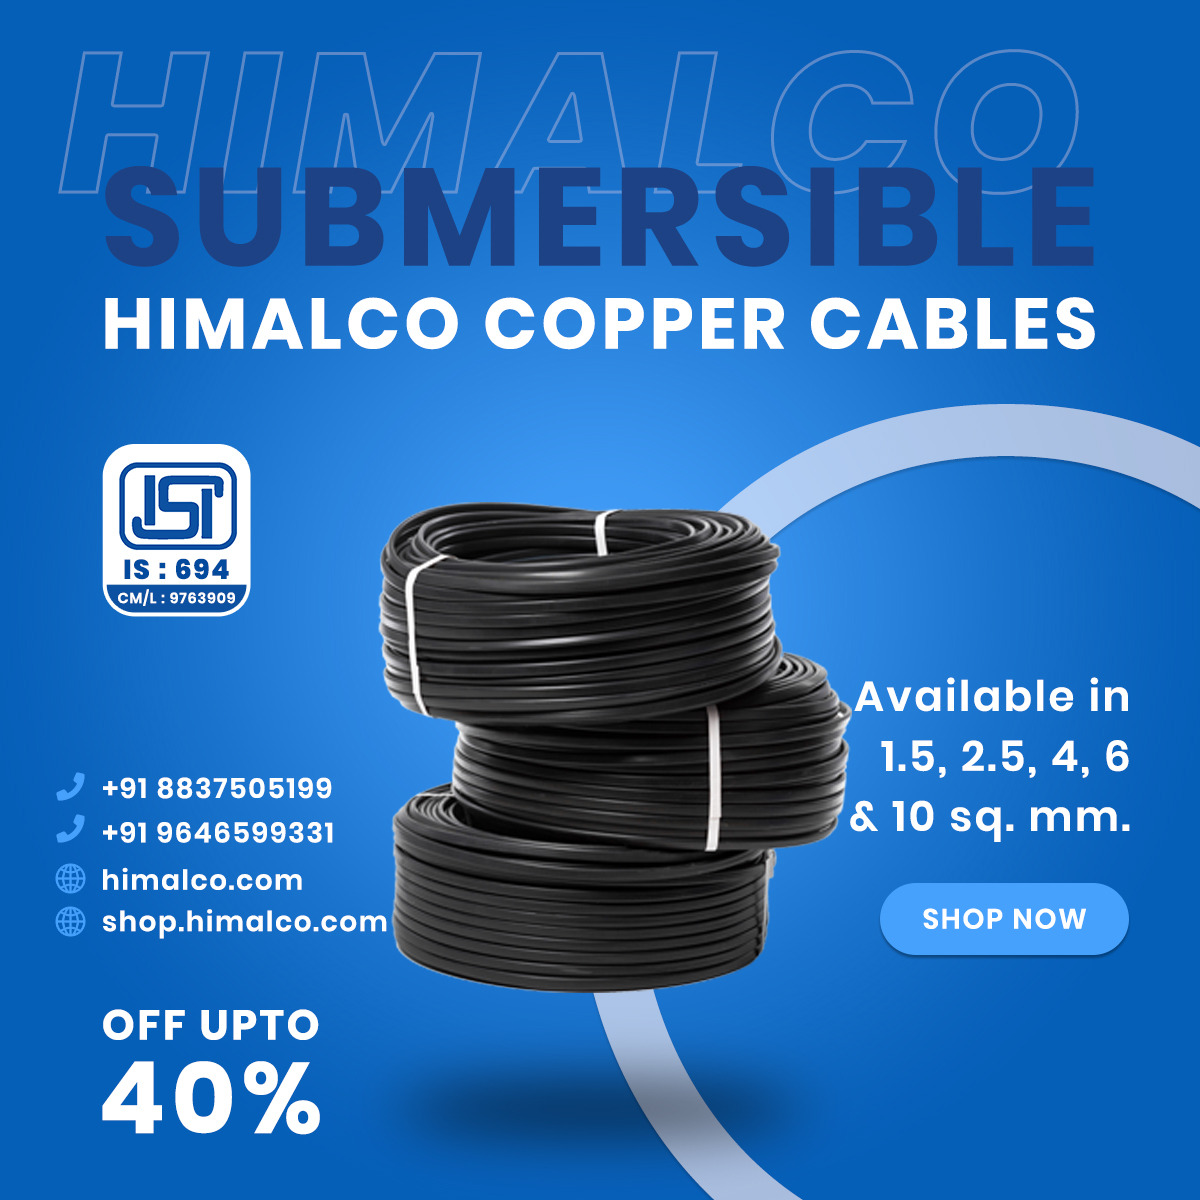 Himalco Copper Wires #copper #copperwire #coppercable #wireandcable #himalco #Chandigarh  #Punjab  #HimachalPradesh